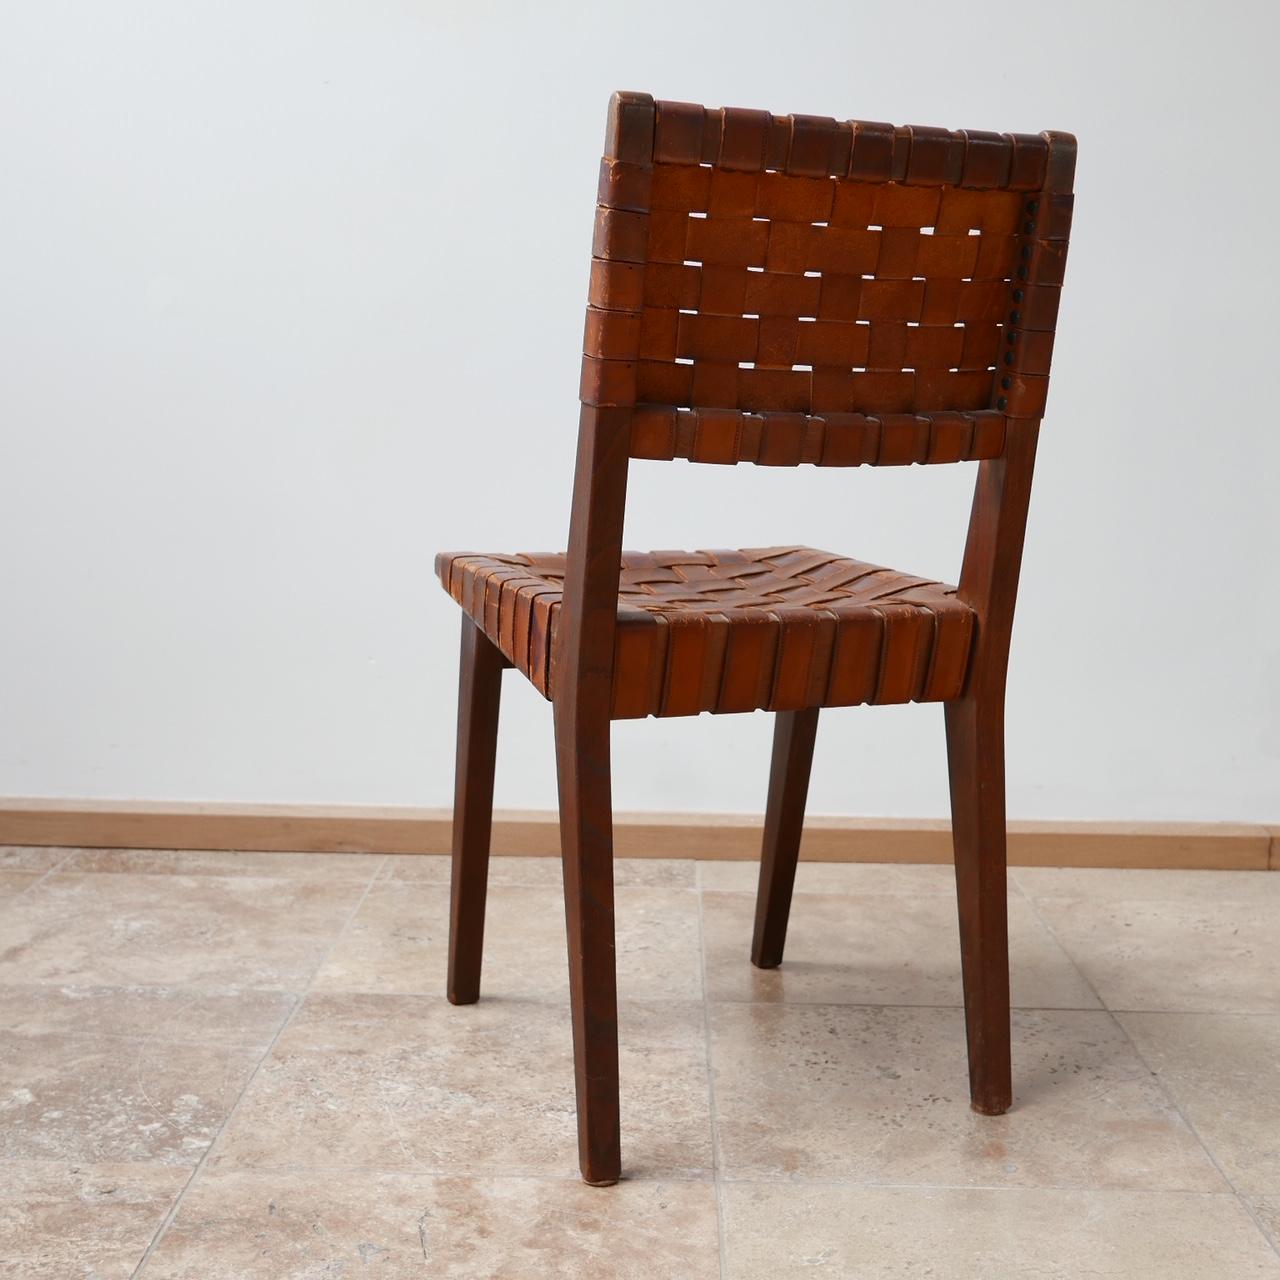 Leather Midcentury Chairs Attributed to Jens Risom 1